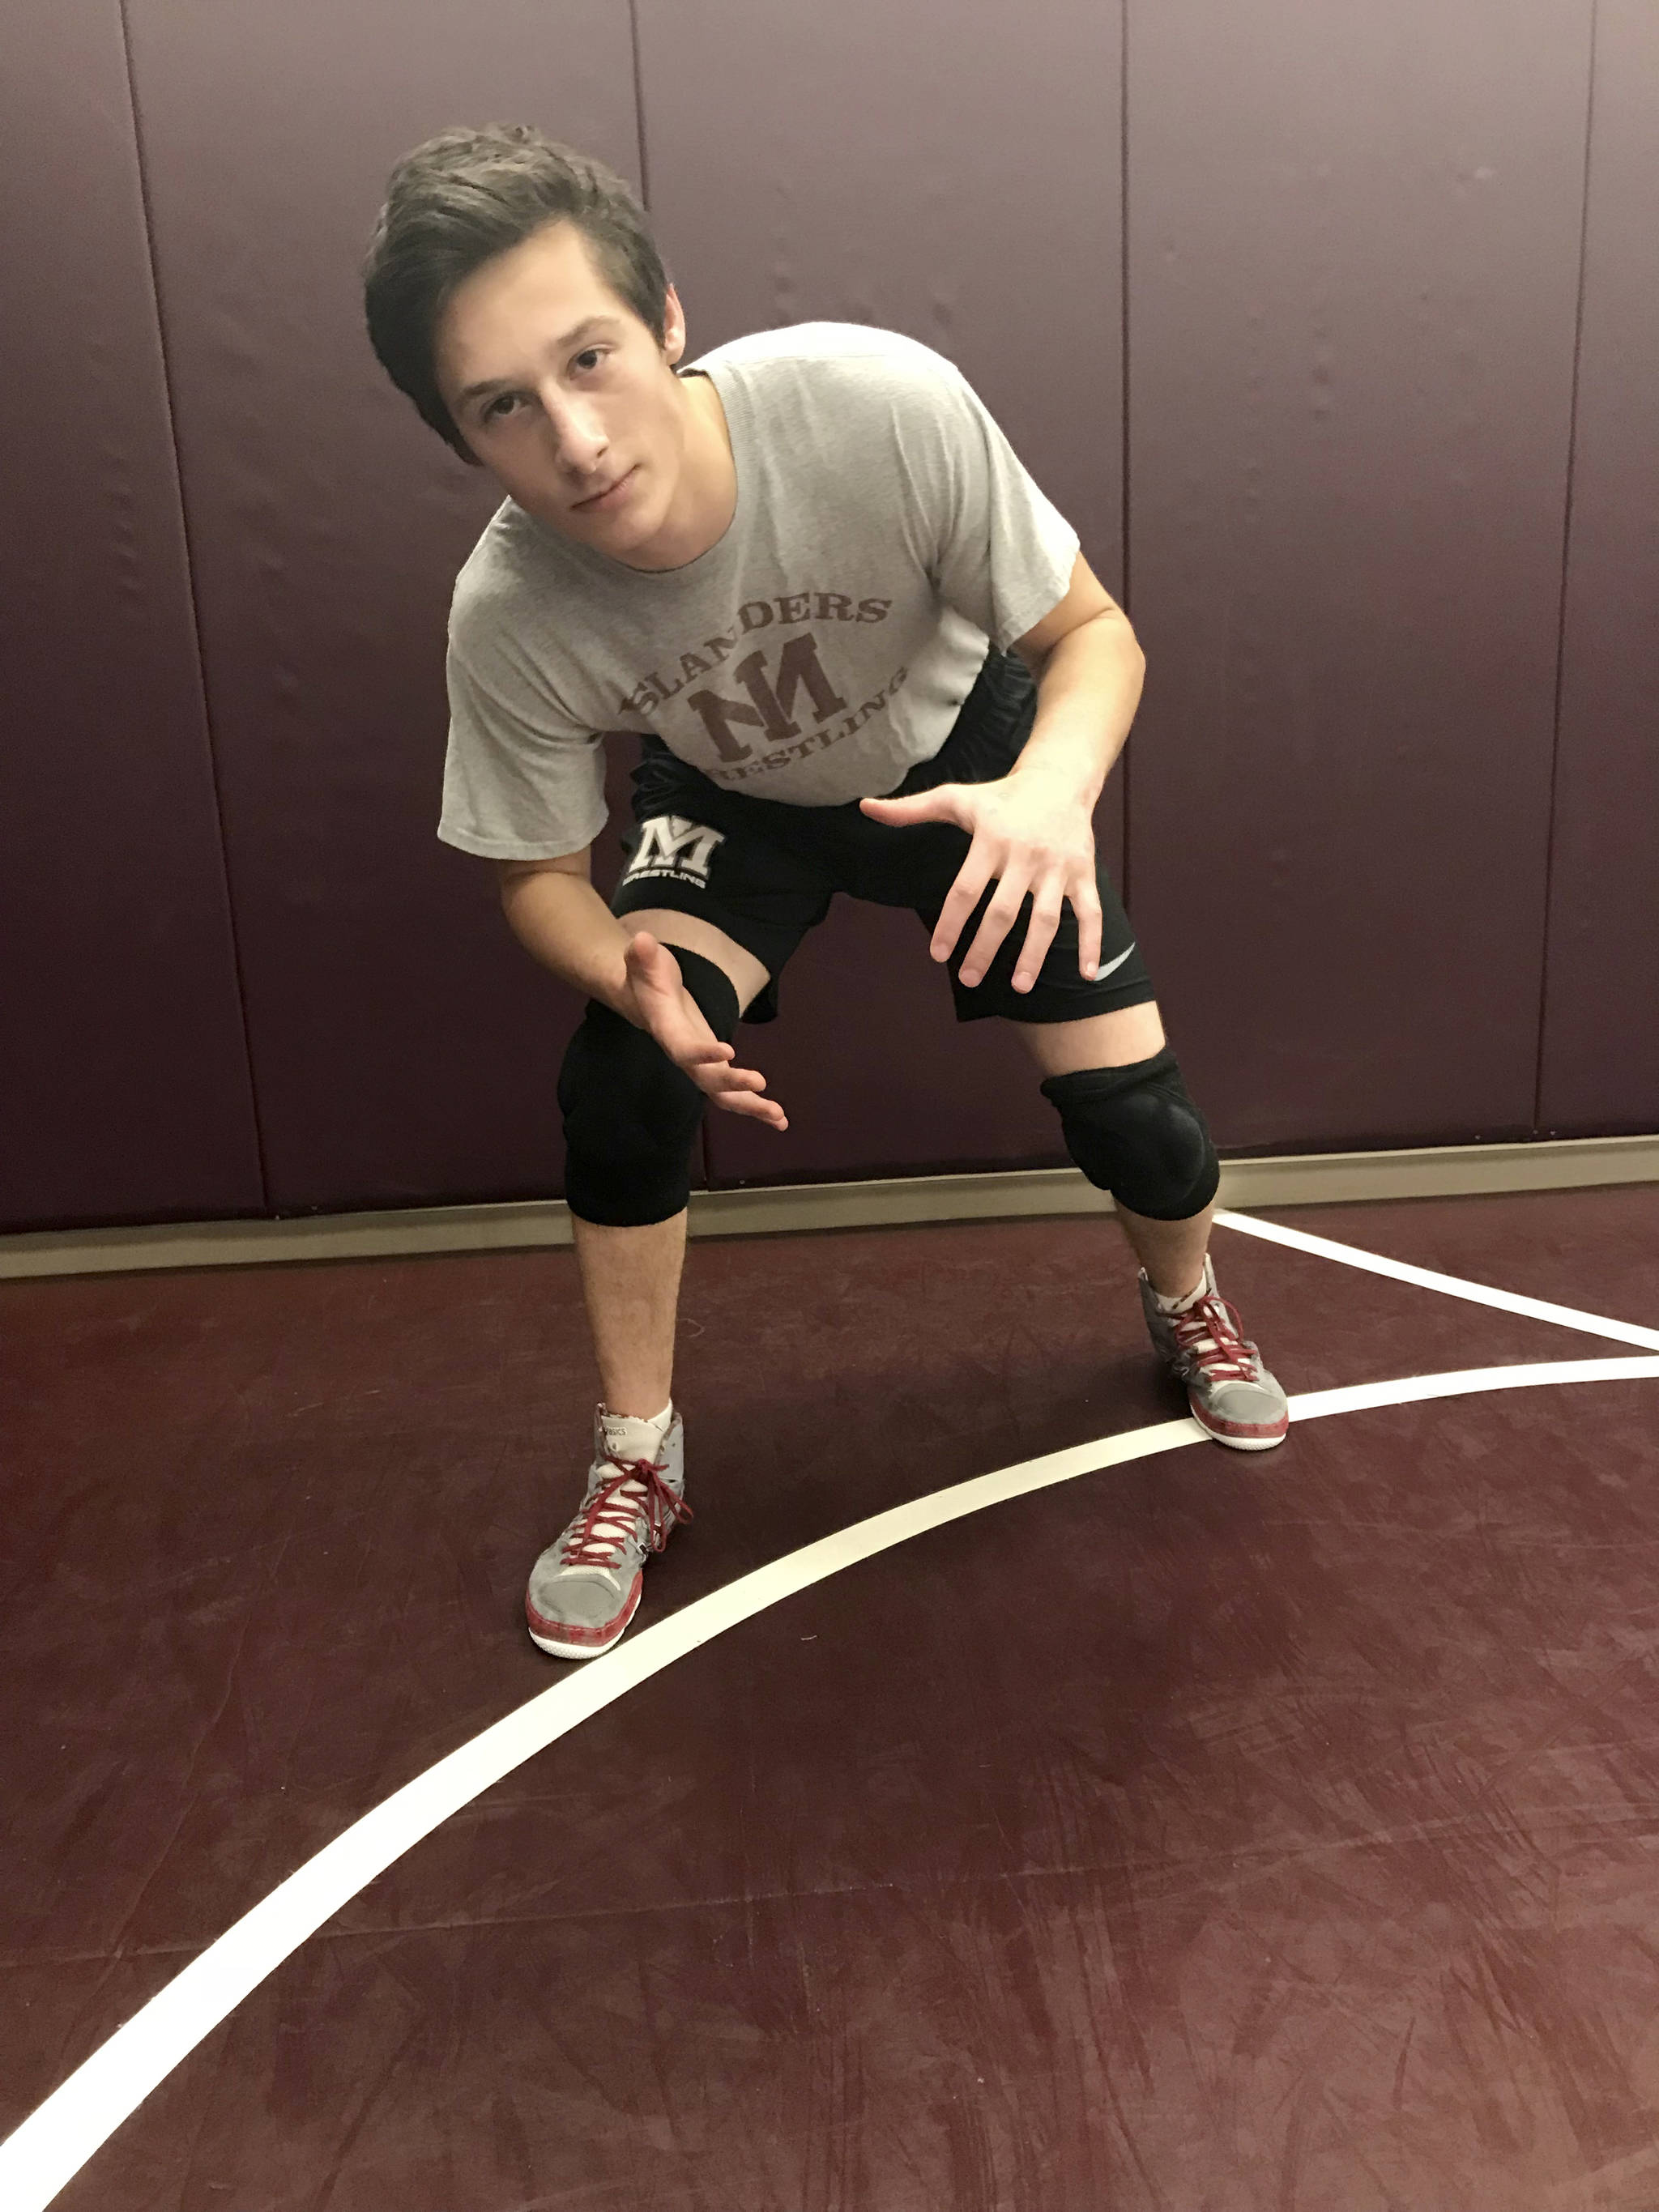 Mercer Island Islanders 138-pound grappler Eli Pruchno, who is one of the Islanders three team captains, is determined to advance to the Mat Classic Class 3A state wrestling tournament this February. Shaun Scott, staff photo